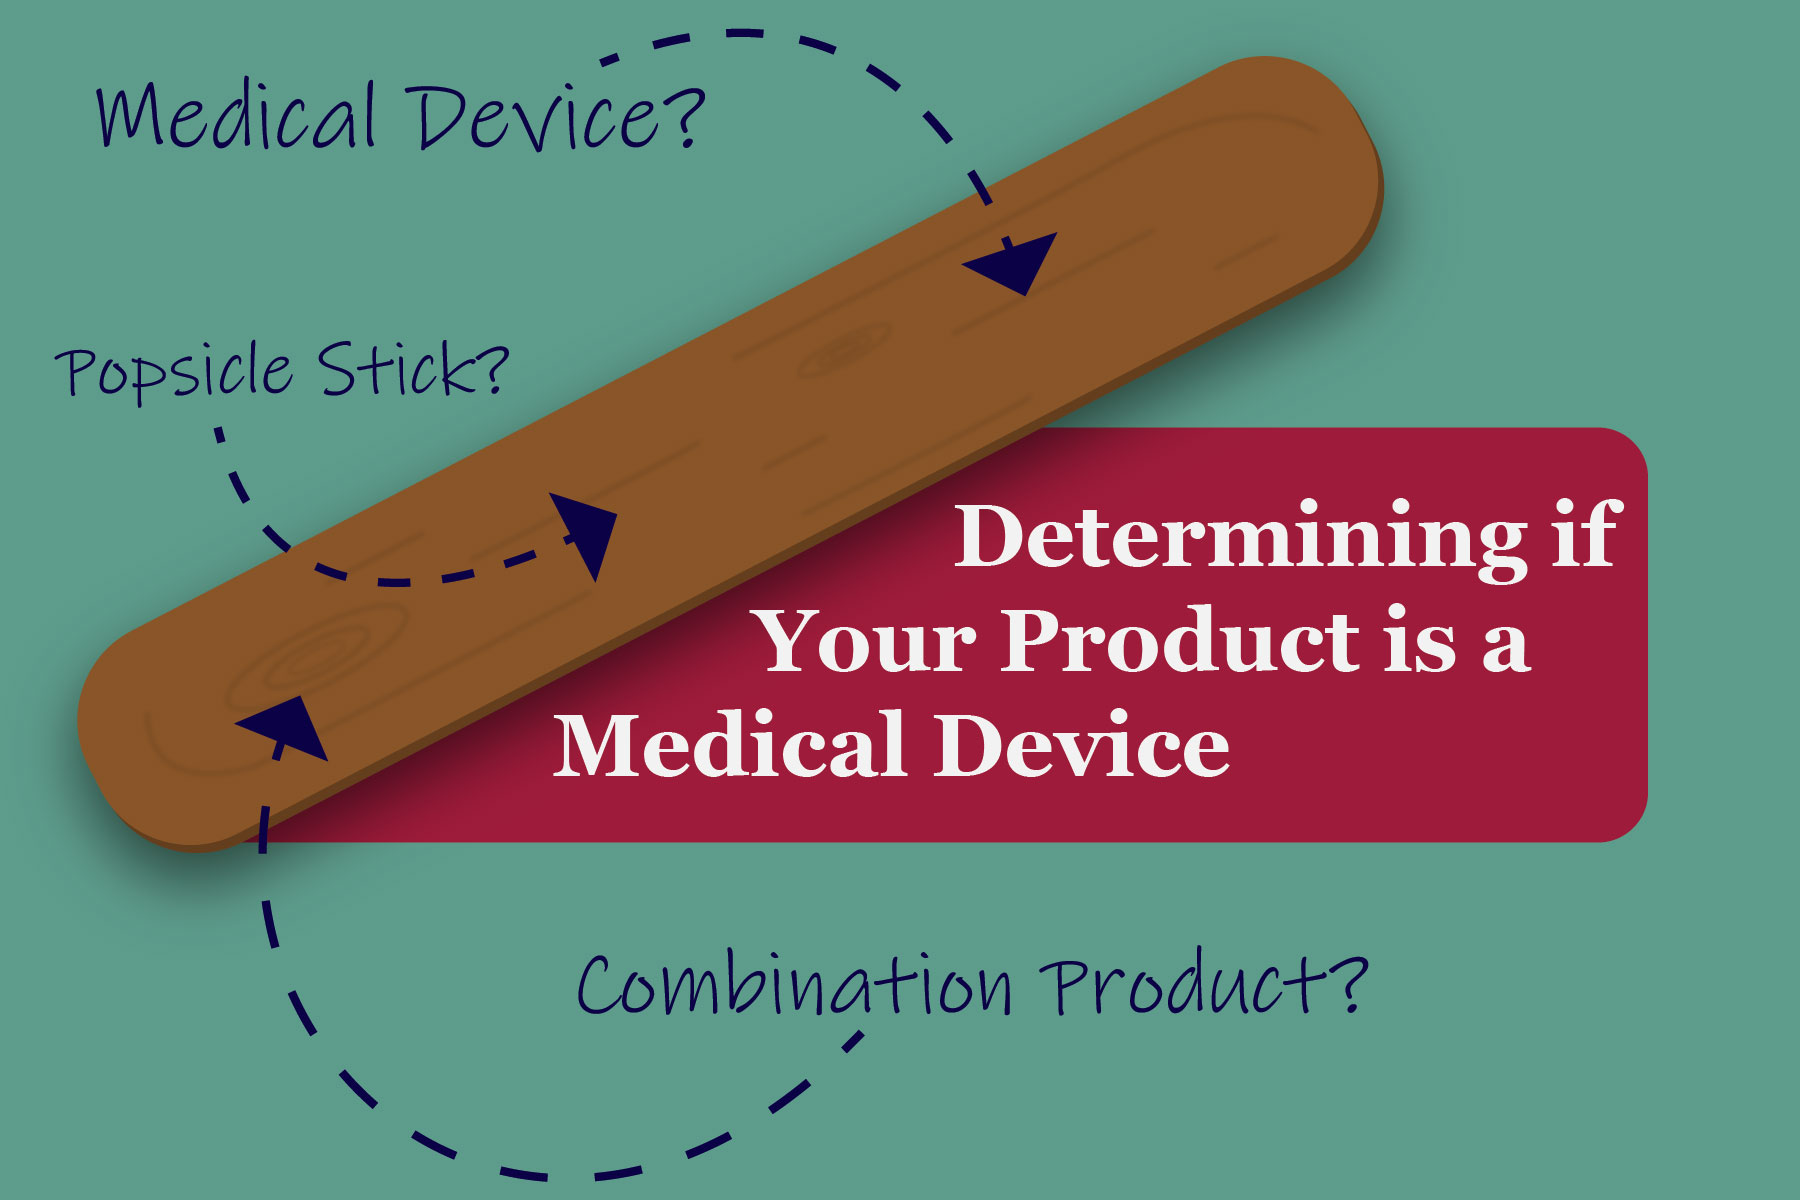 Determining if your Product is a Medical Device